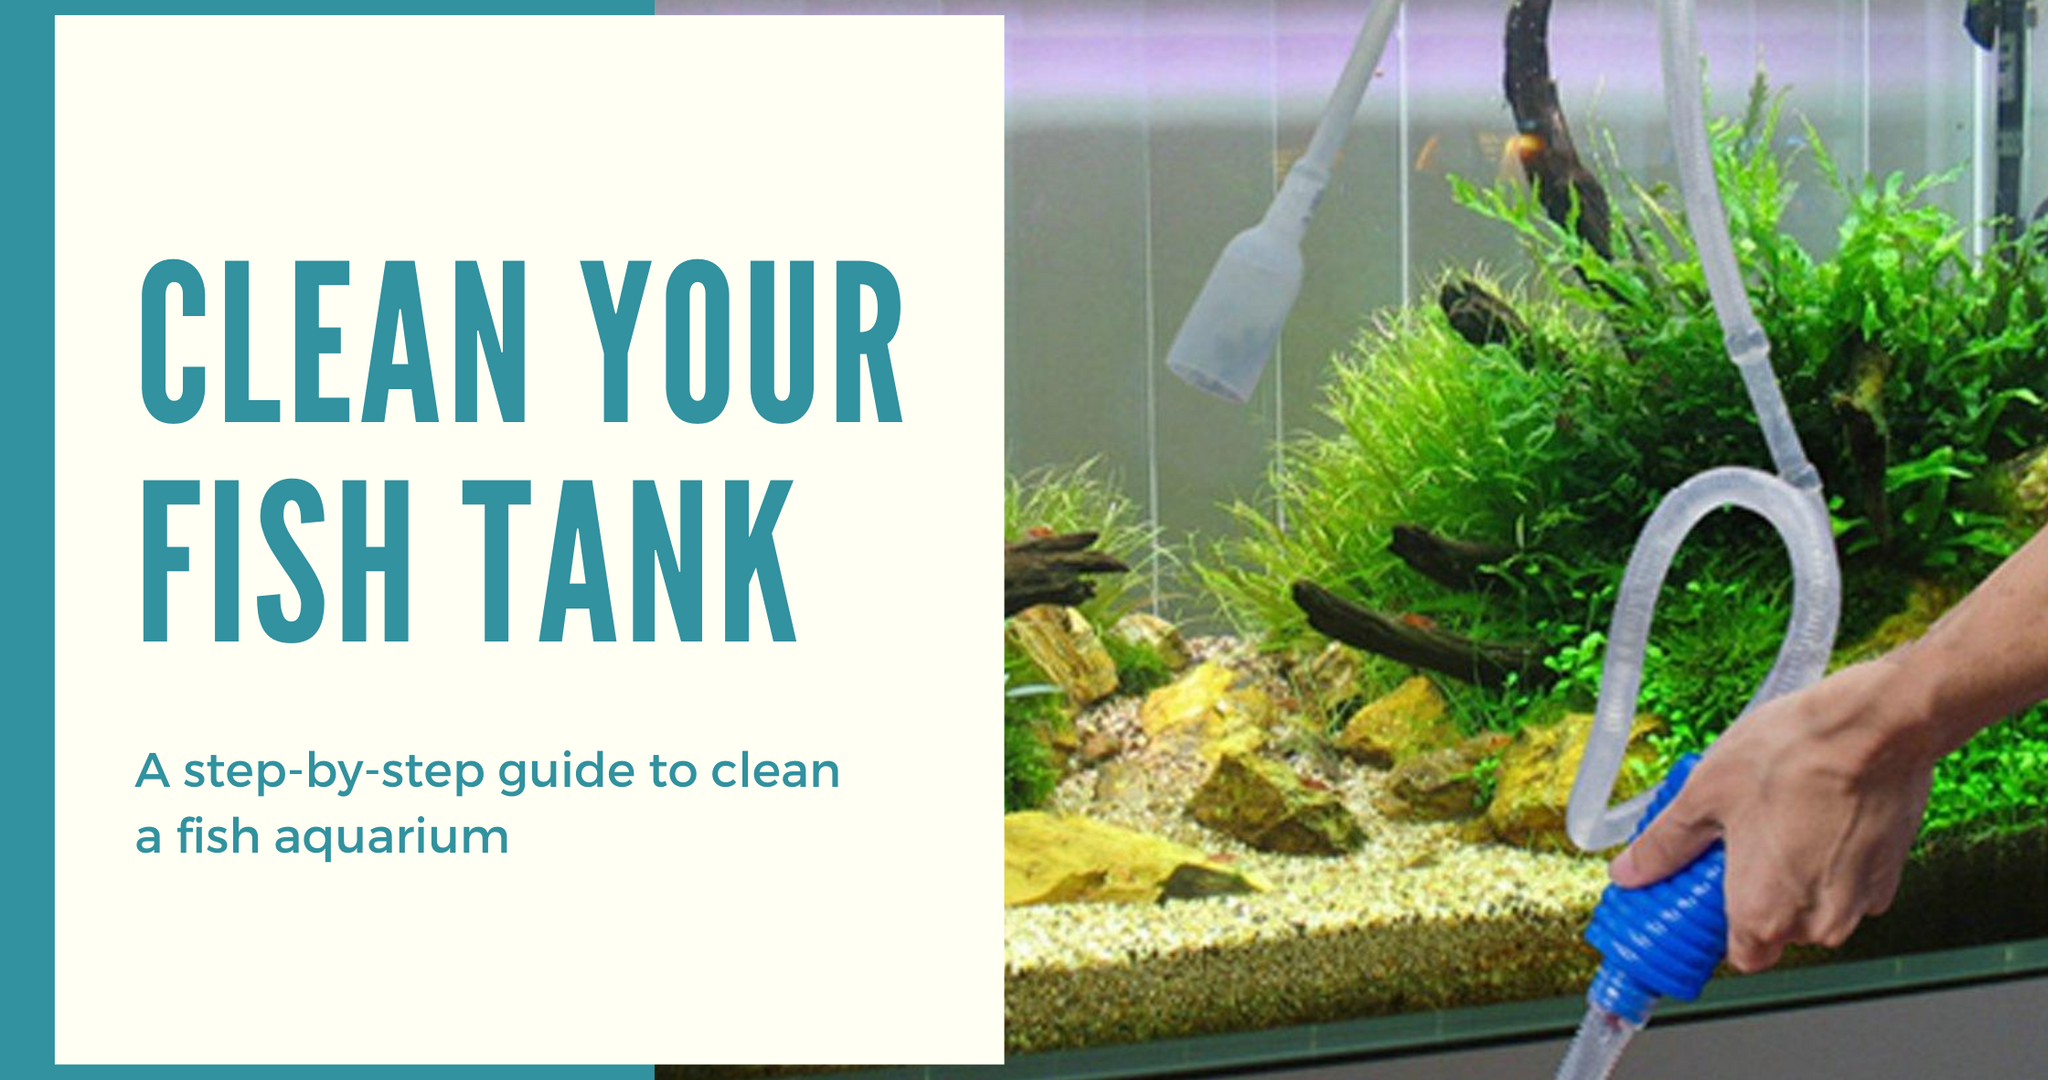 How To Clean A Fish Aquarium On Your Own